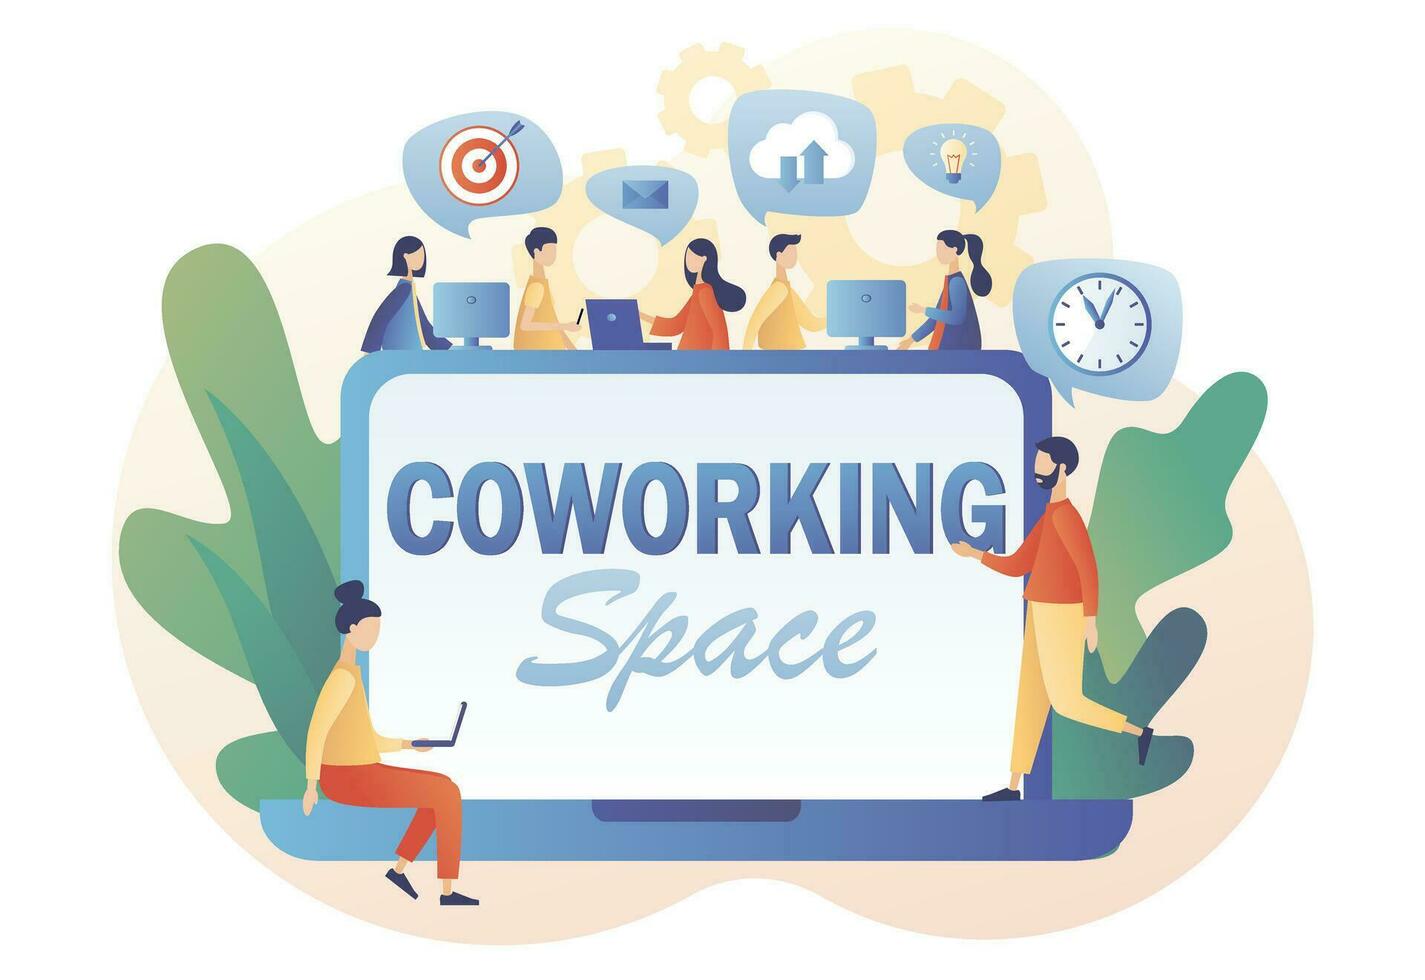 Tiny people working on computers, smartphones on shared modern office workplace. Co-working space - text on laptop screen. Shared working environment. Modern flat cartoon style. Vector illustration